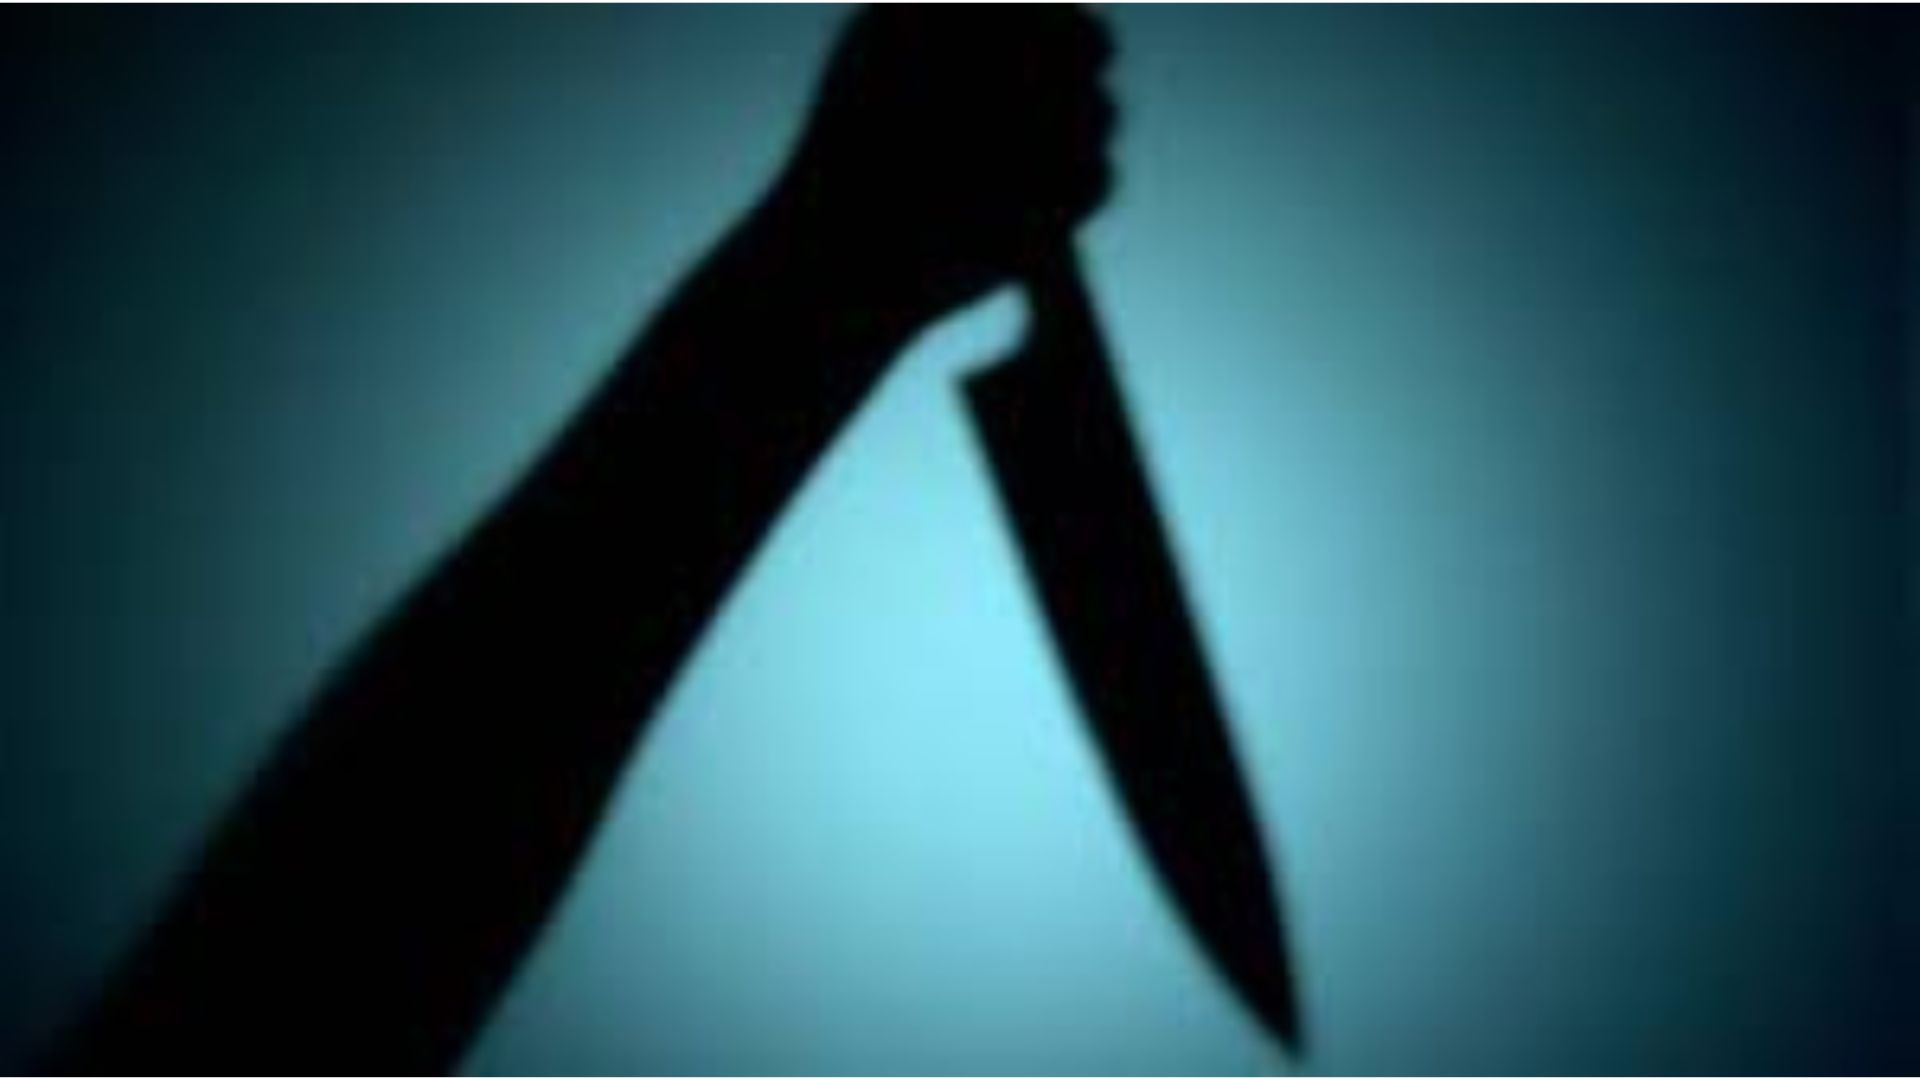 A Shadow Of A Person Holding A Knife And Ready To Stab Someone